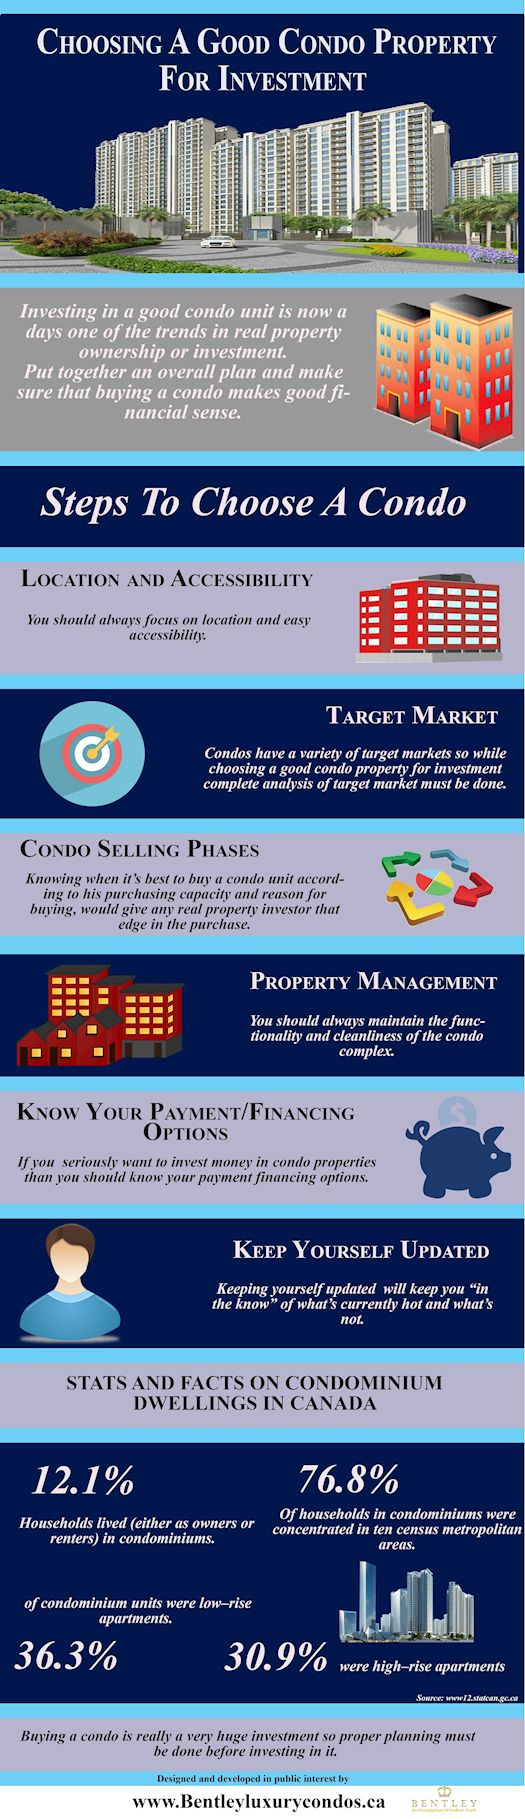 Choosing A Good Condo Property For Investment